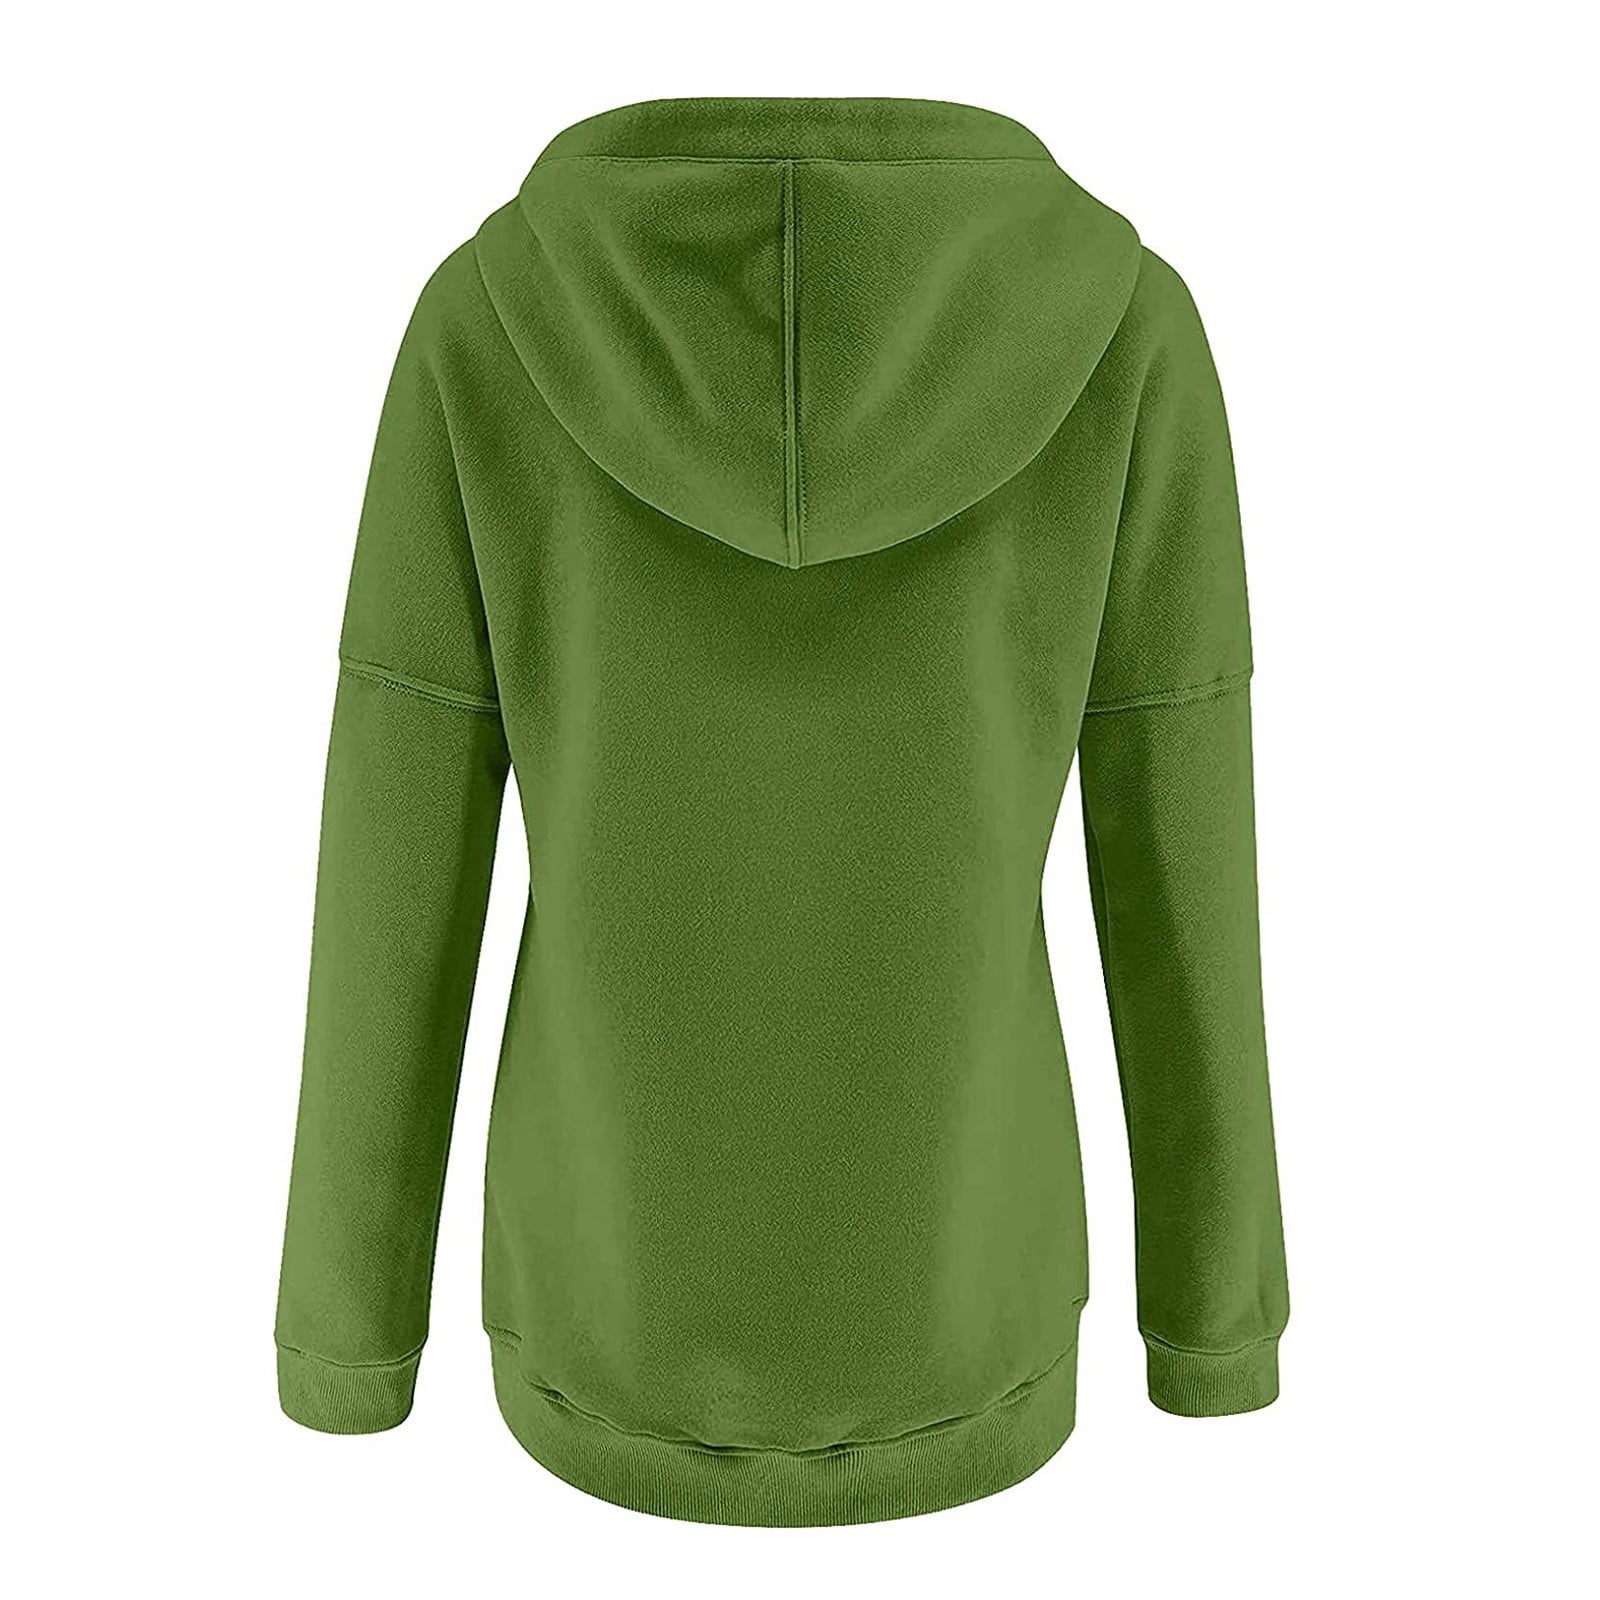  sumensumen Hoodies For Women Plus Size Cute Long Sleeve Tops  2023 Fashion Warm Sweatshirt Loose Fitting Shirts Pullover Green,Small :  Clothing, Shoes & Jewelry